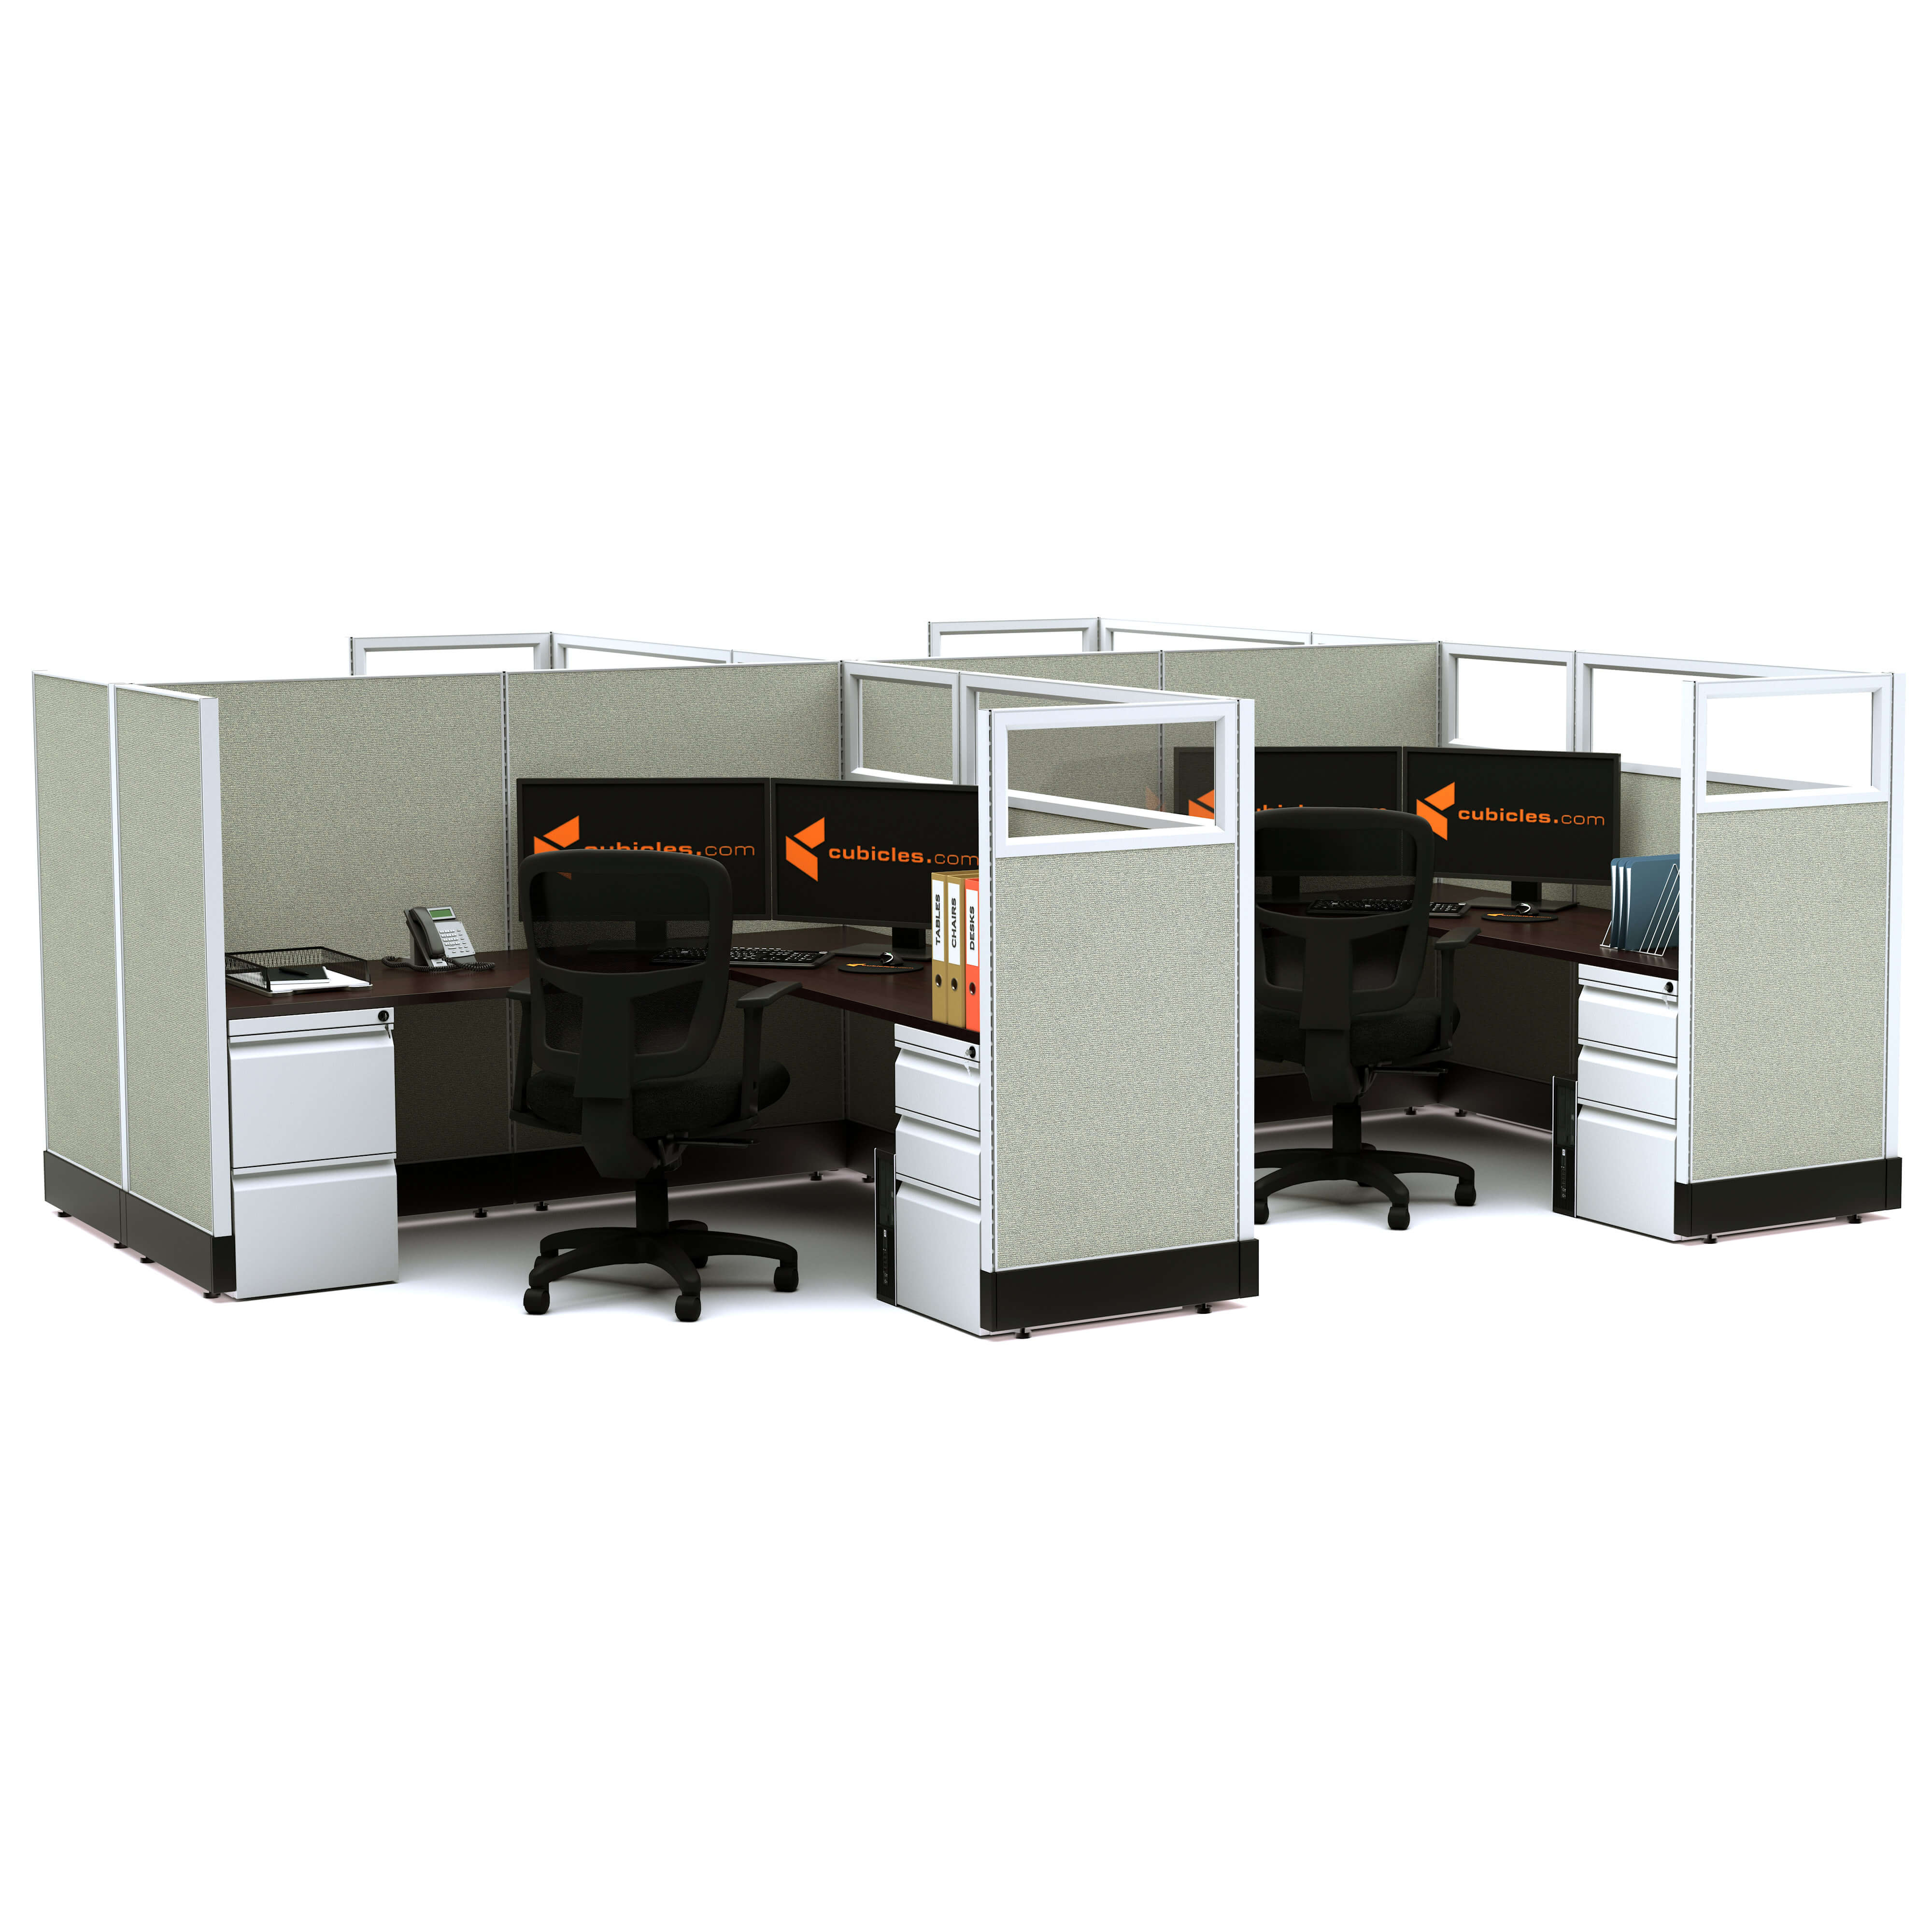 modular-office-furniture-partial-glass-office-cubicles-53h-4pack-cluster-powered.jpg